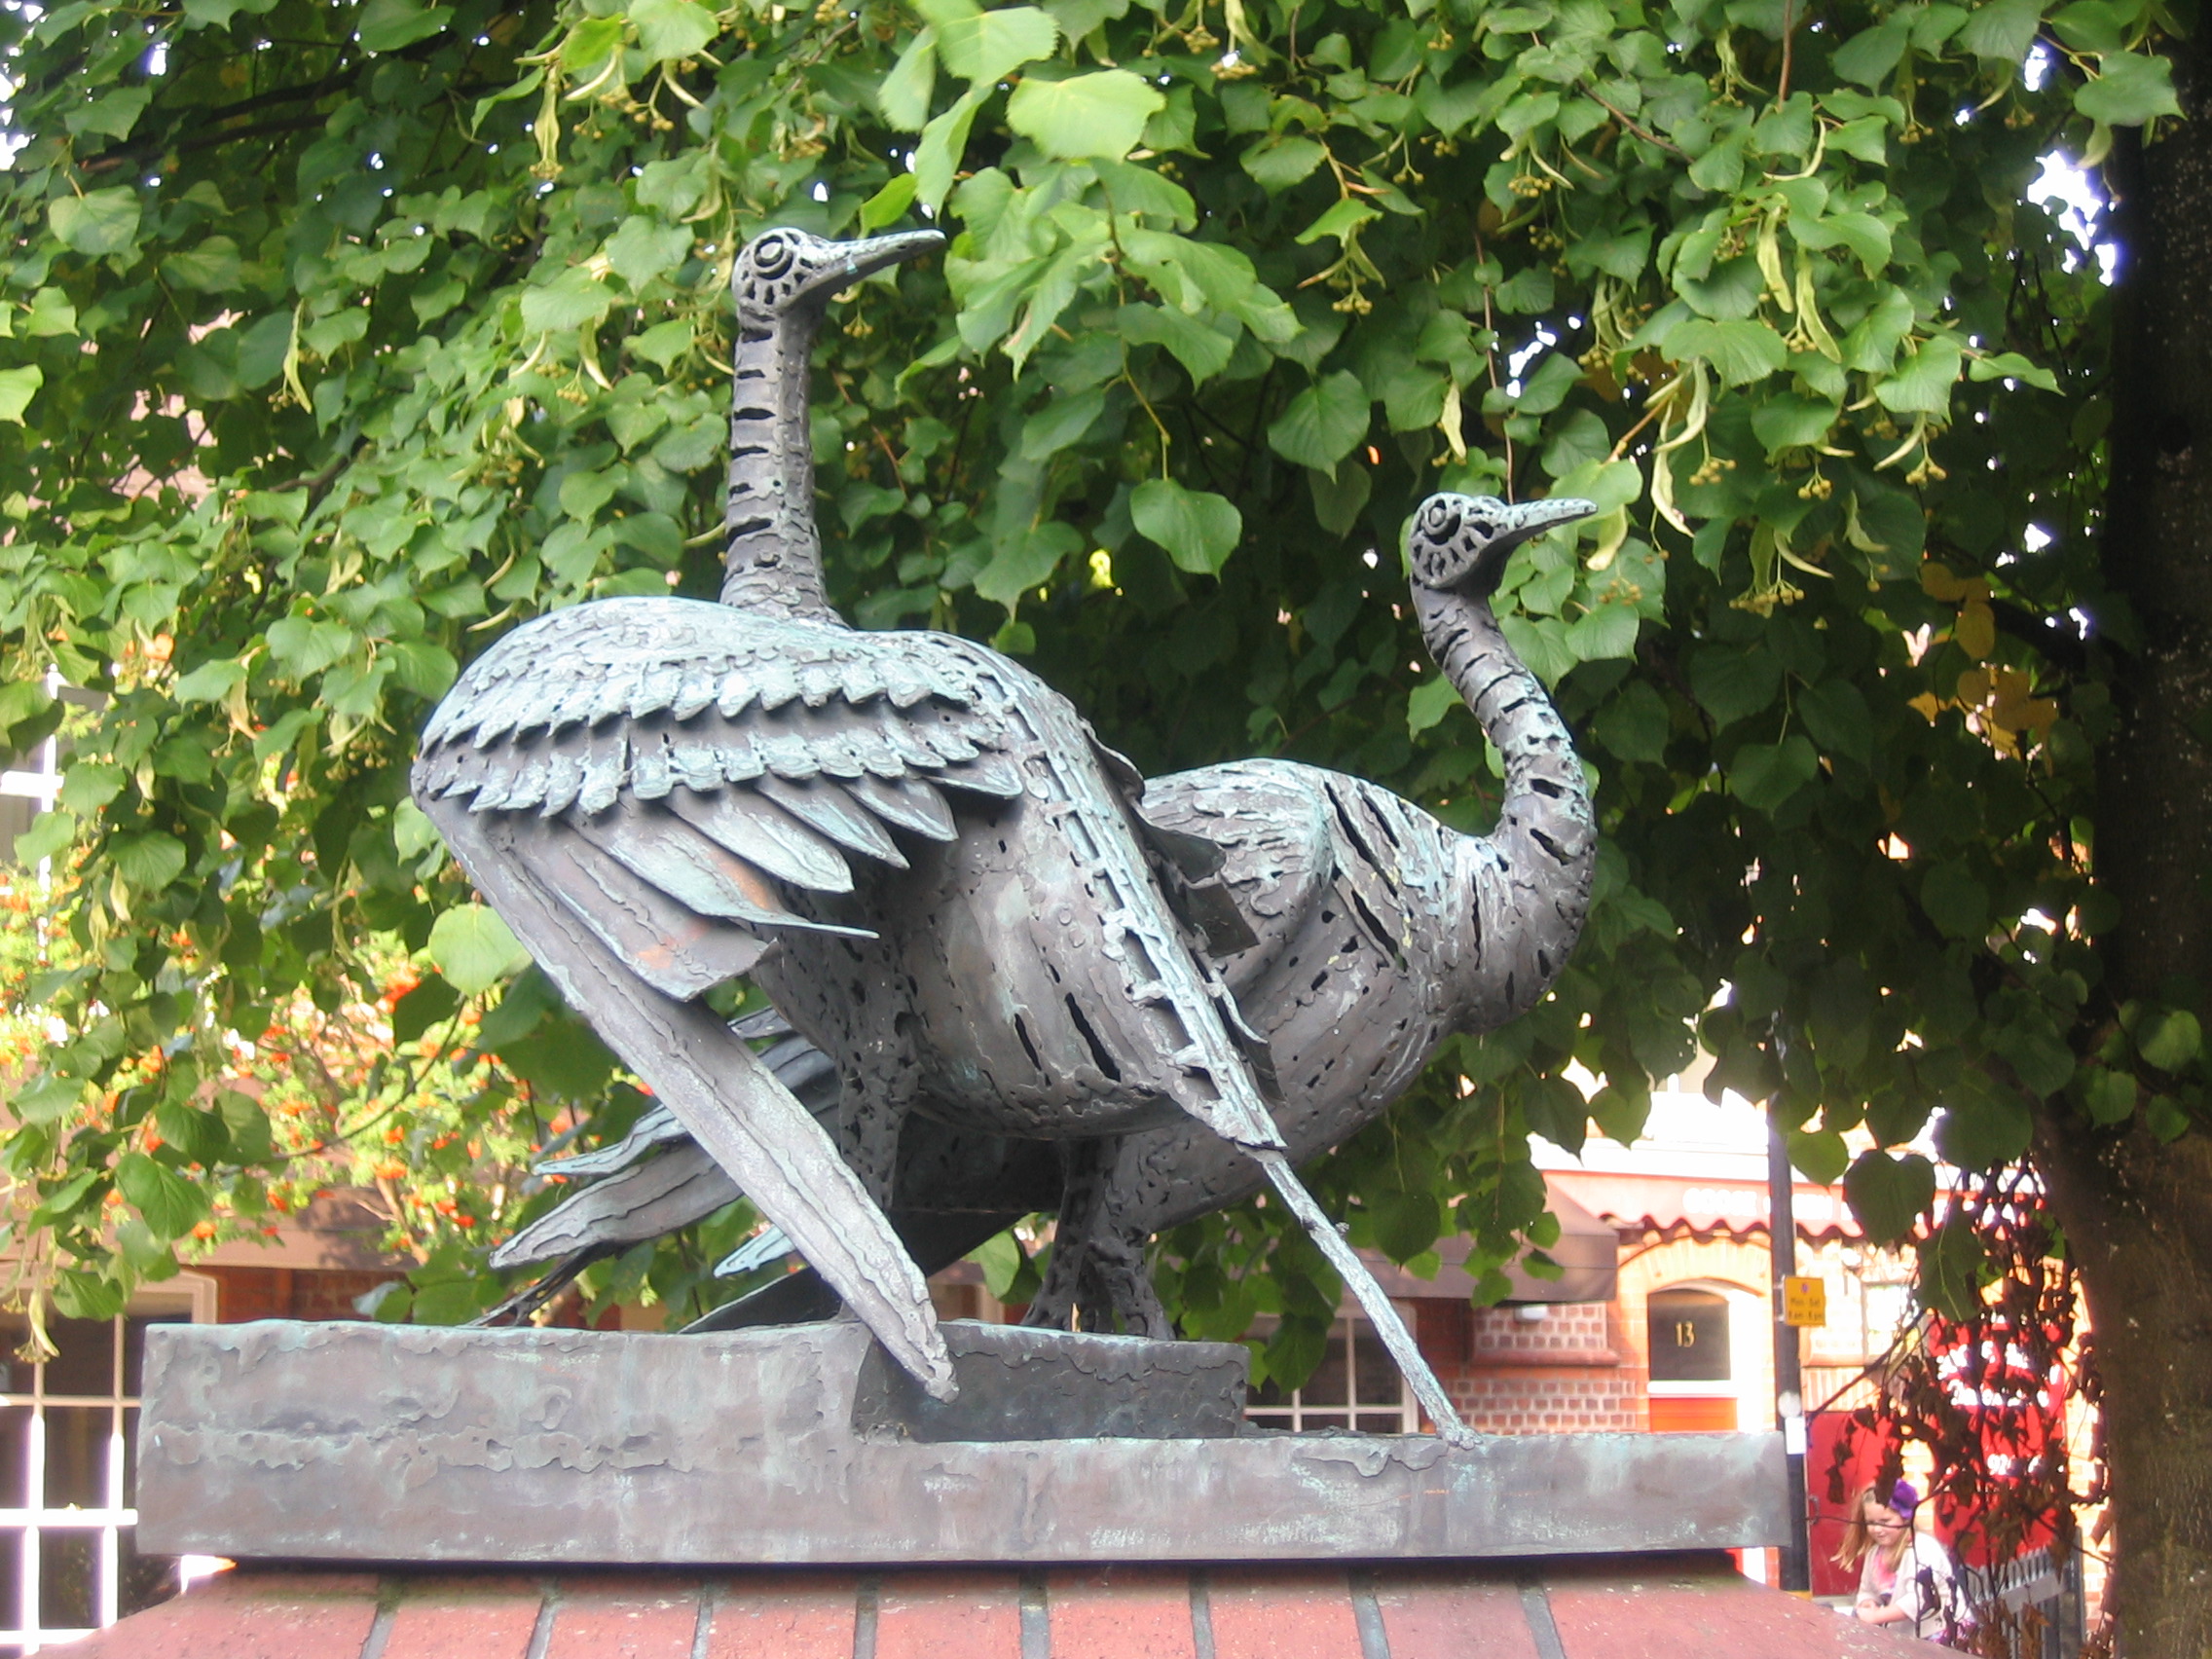 photo taken by me - The metal Geese in Altrincham 